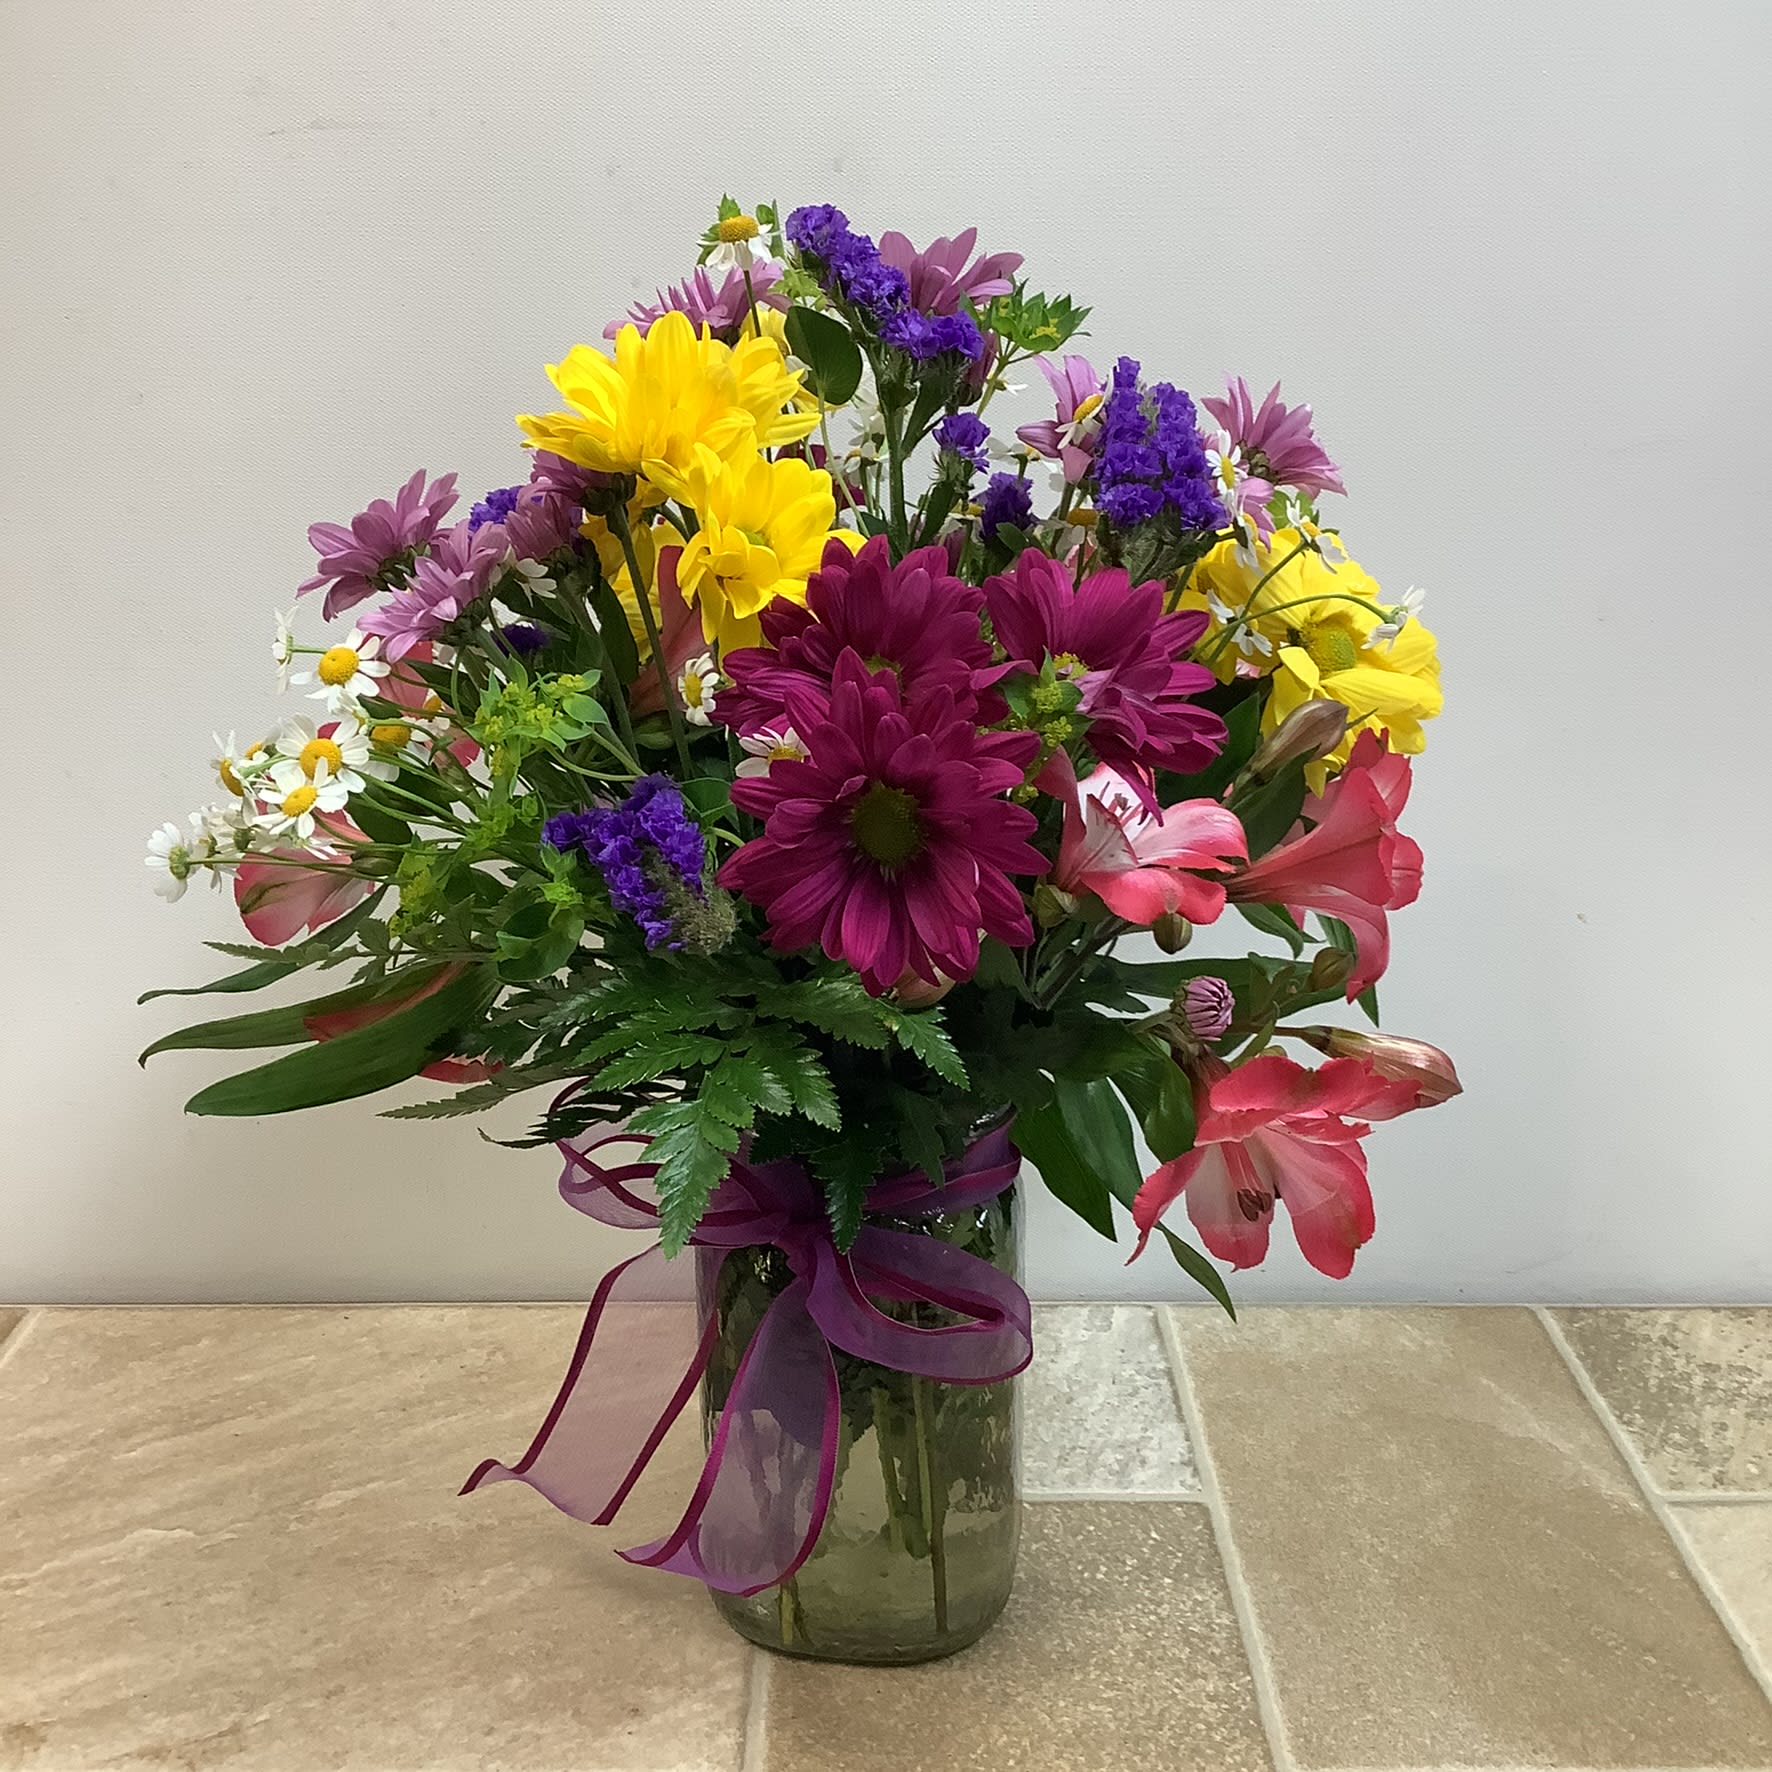 Blossom  - A bright and cheerful bouquet suited for any occasion. Colorful daisies, statis, alstroemeria and chamomile are arranged in a hammered quart sized glass vase. 